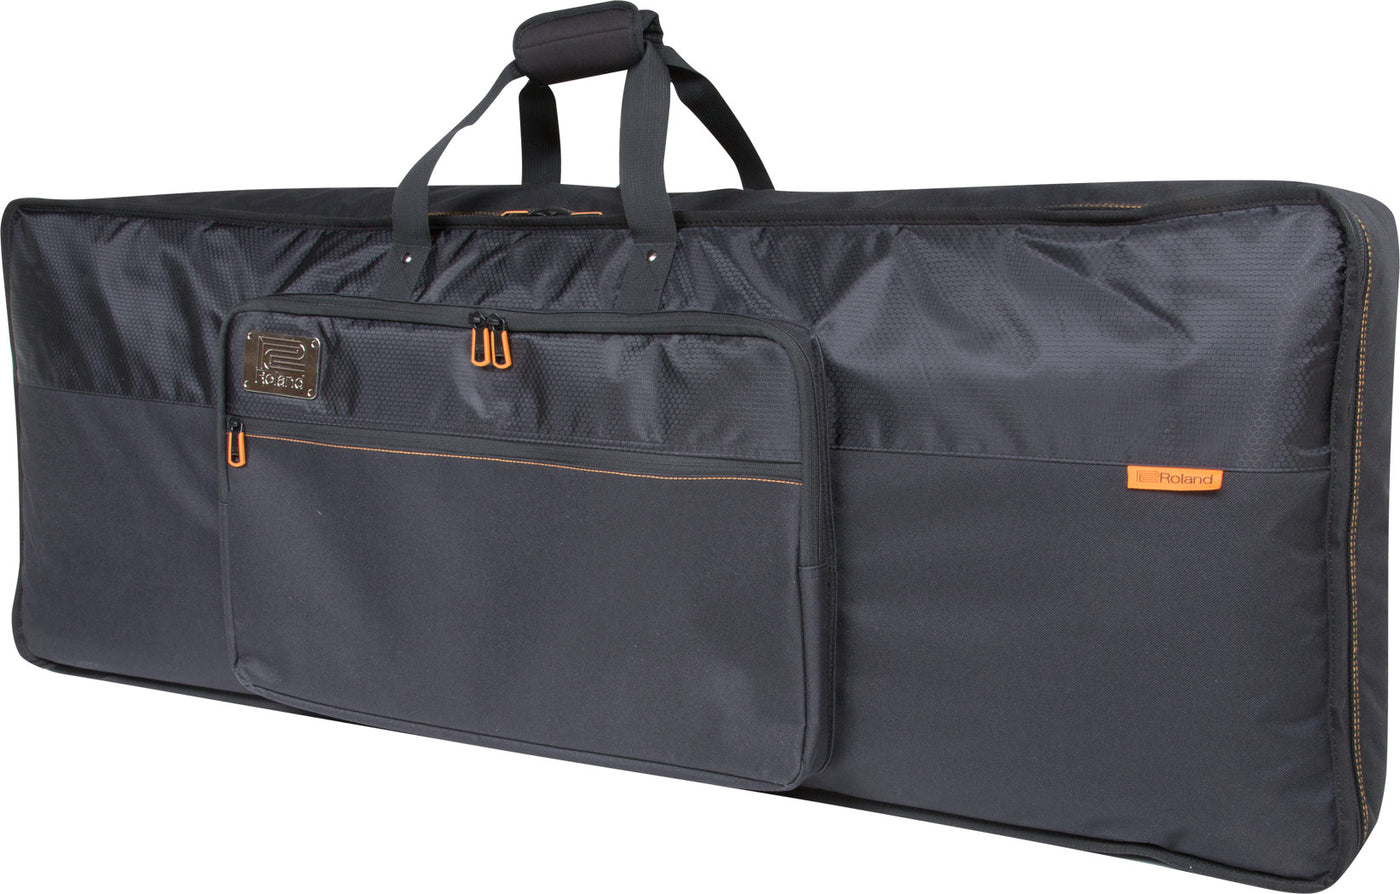 Roland CB-B49 Keyboard Bag, 49 Key with Backpack Straps